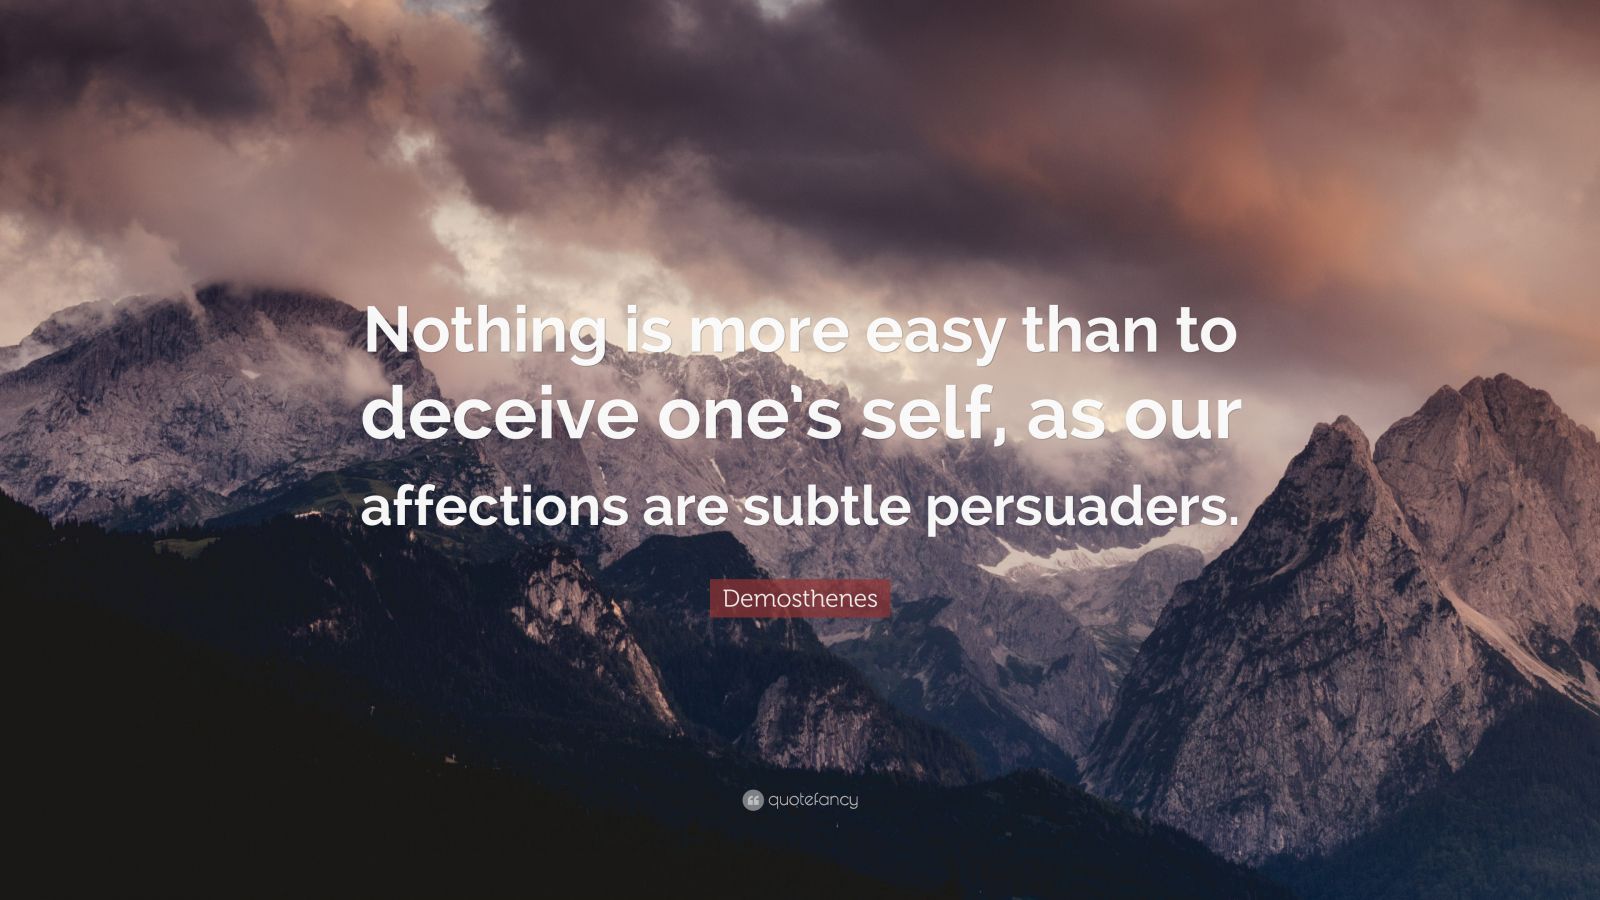 Demosthenes Quote: “Nothing is more easy than to deceive one’s self, as ...